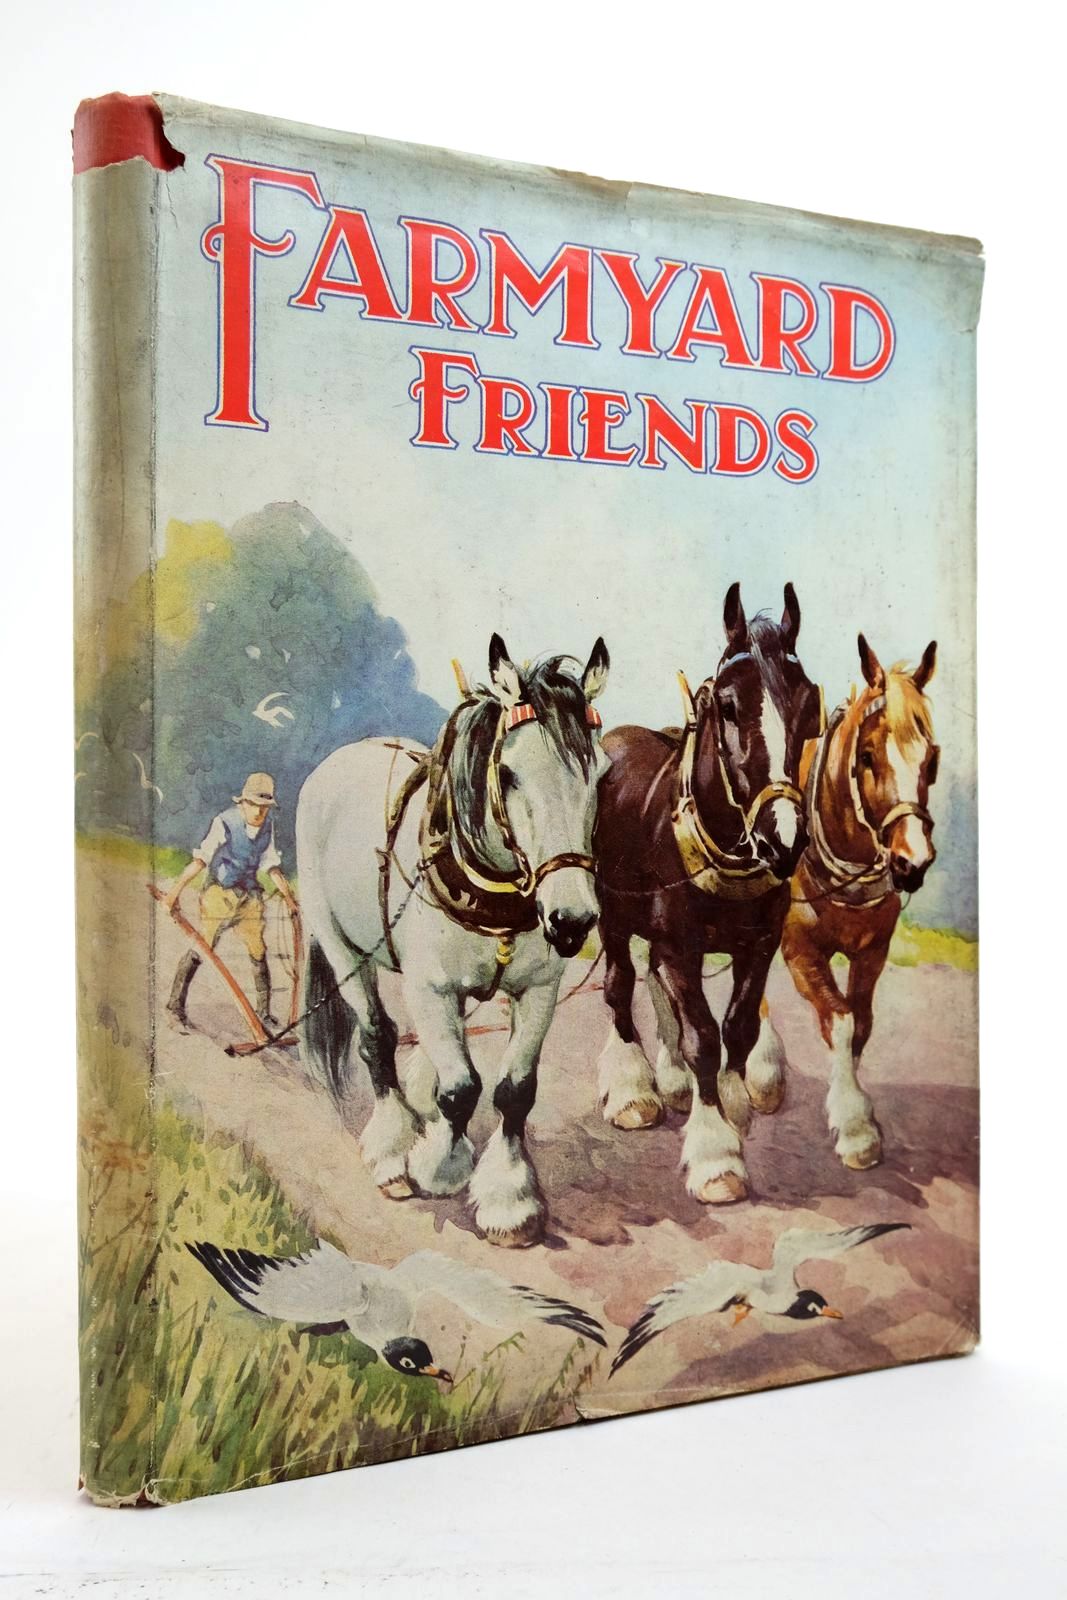 Photo of FARMYARD FRIENDS written by Groom, Arthur illustrated by Kennedy, A.E. published by Birn Brothers Ltd. (STOCK CODE: 2139050)  for sale by Stella & Rose's Books